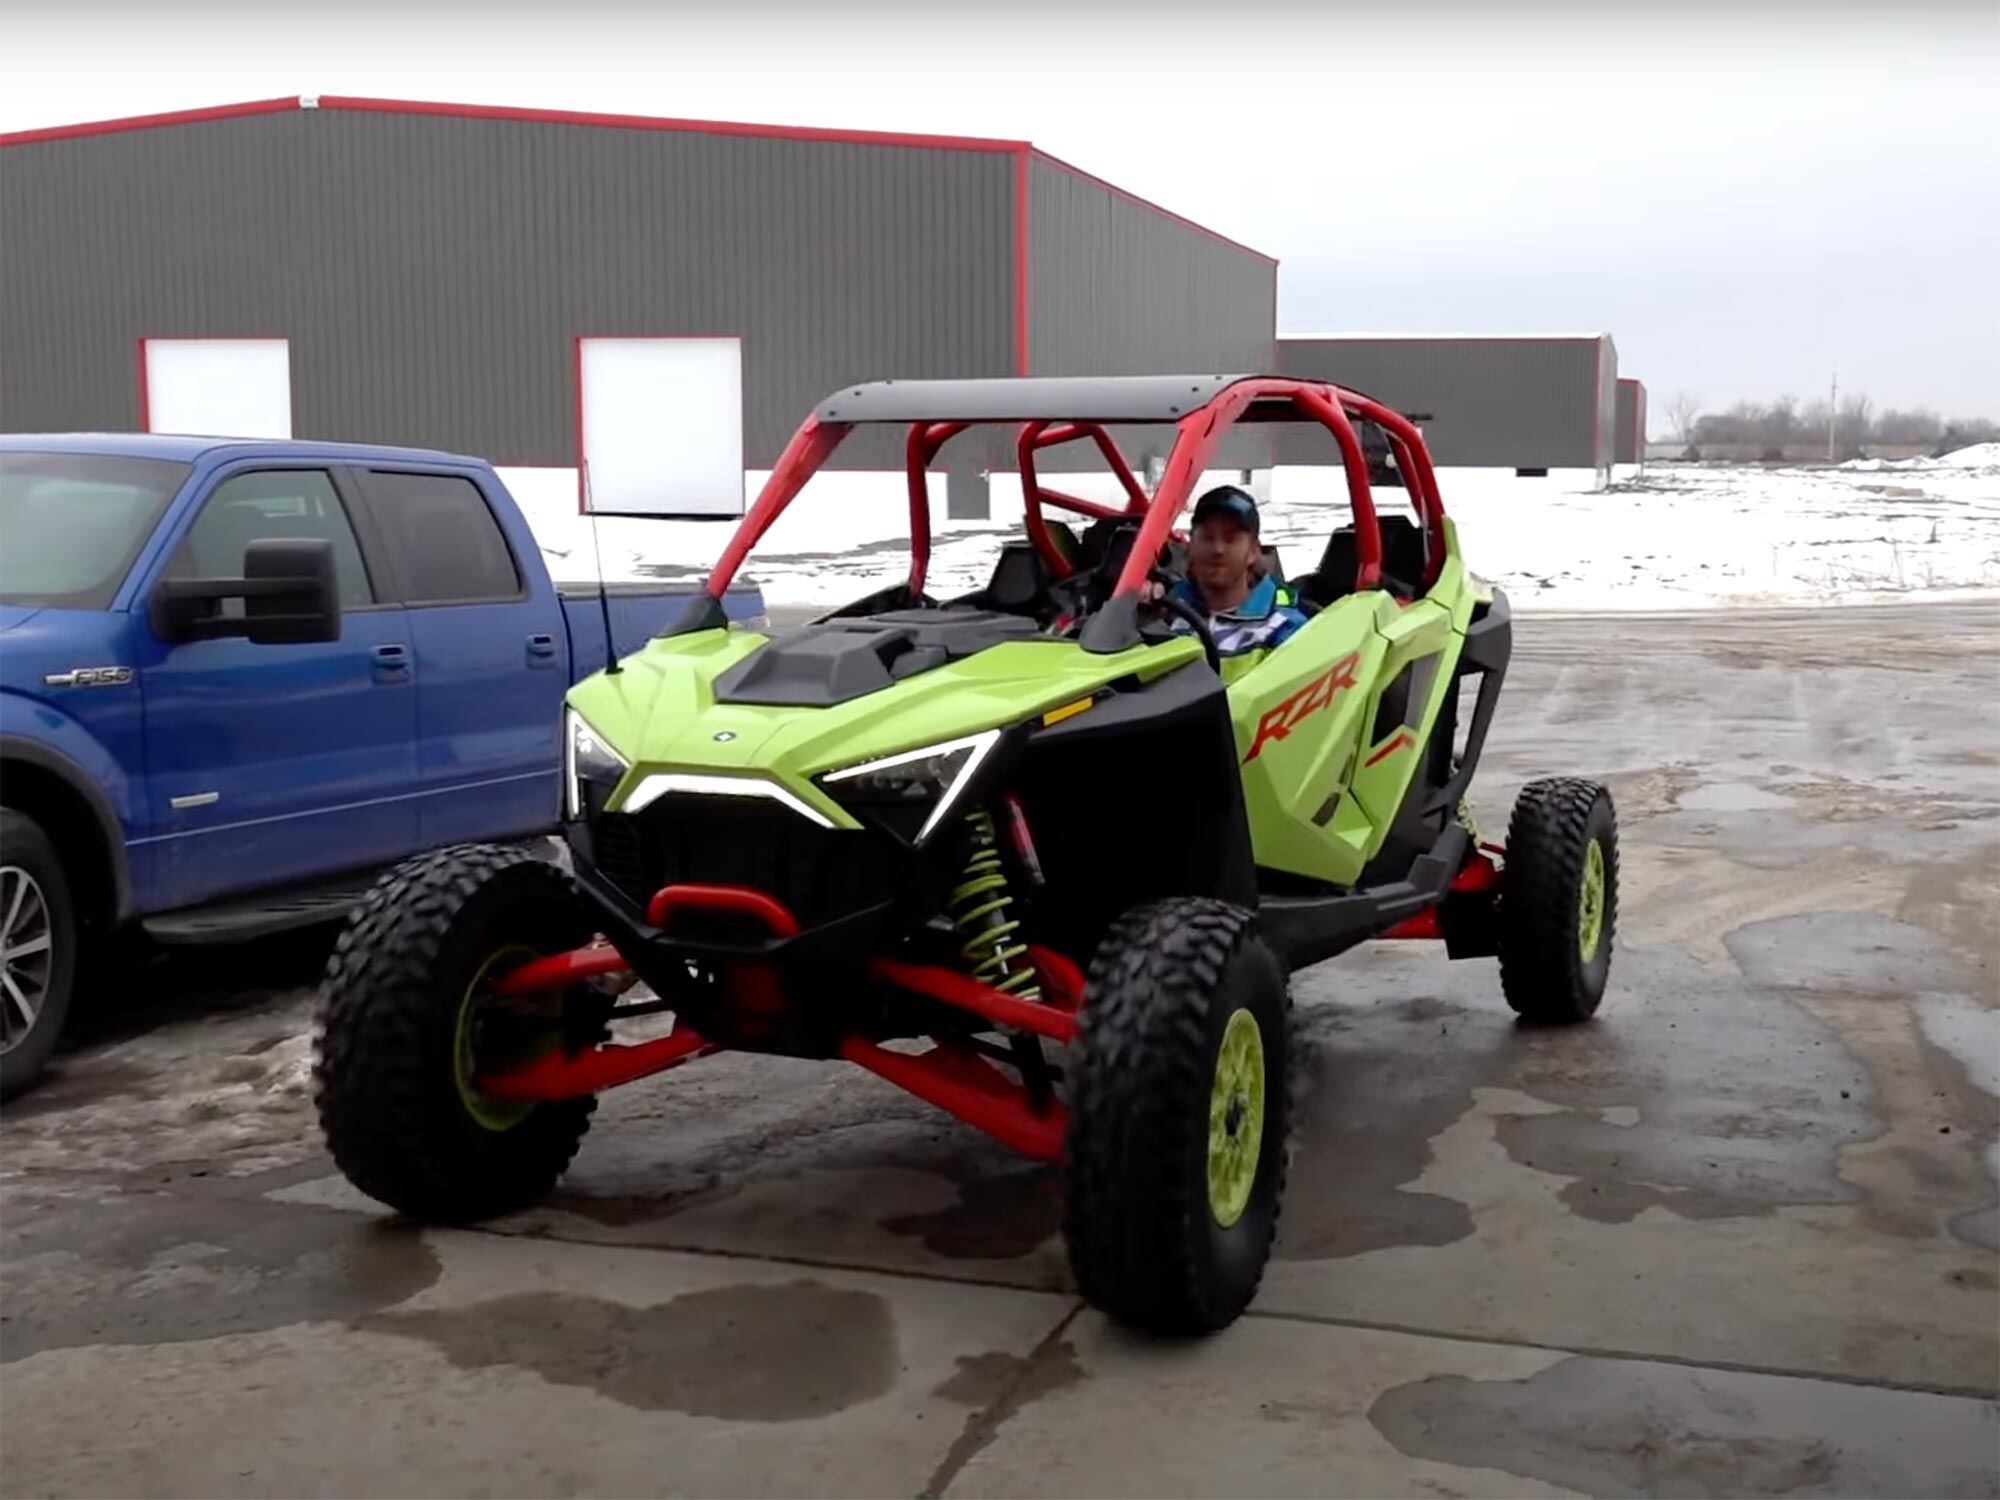 It’s a Launch Edition four-seat model outfitted in the Lifted Lime color scheme.